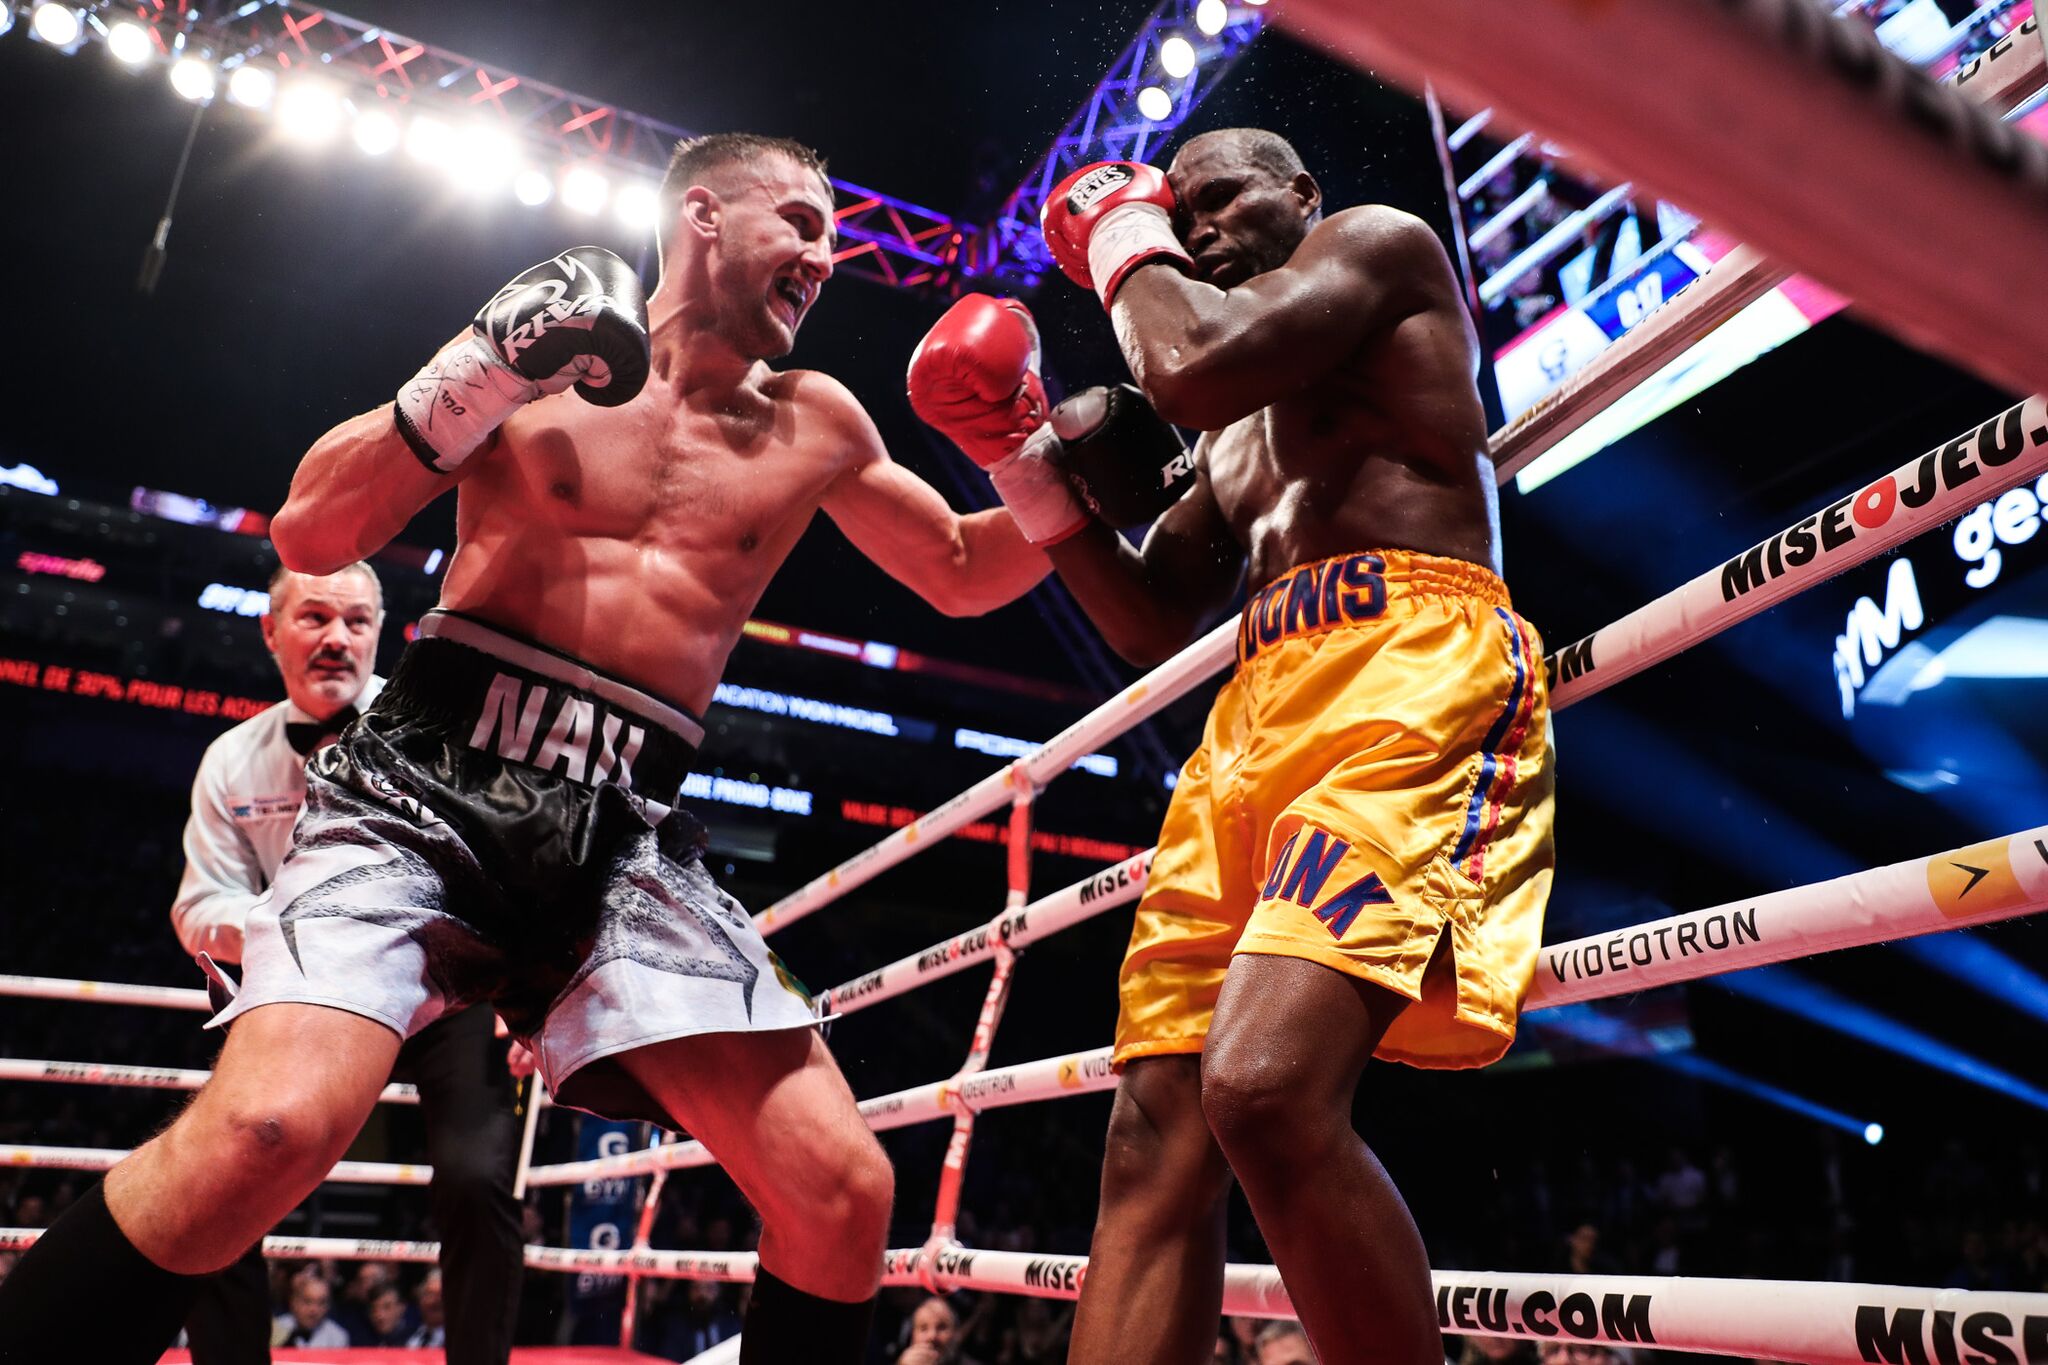 Oleksandr Gvozdyk (left) moves in on a stunned Adonis Stevenson to land his finishing punches. Photo by Amanda Westcott-SHOWTIME